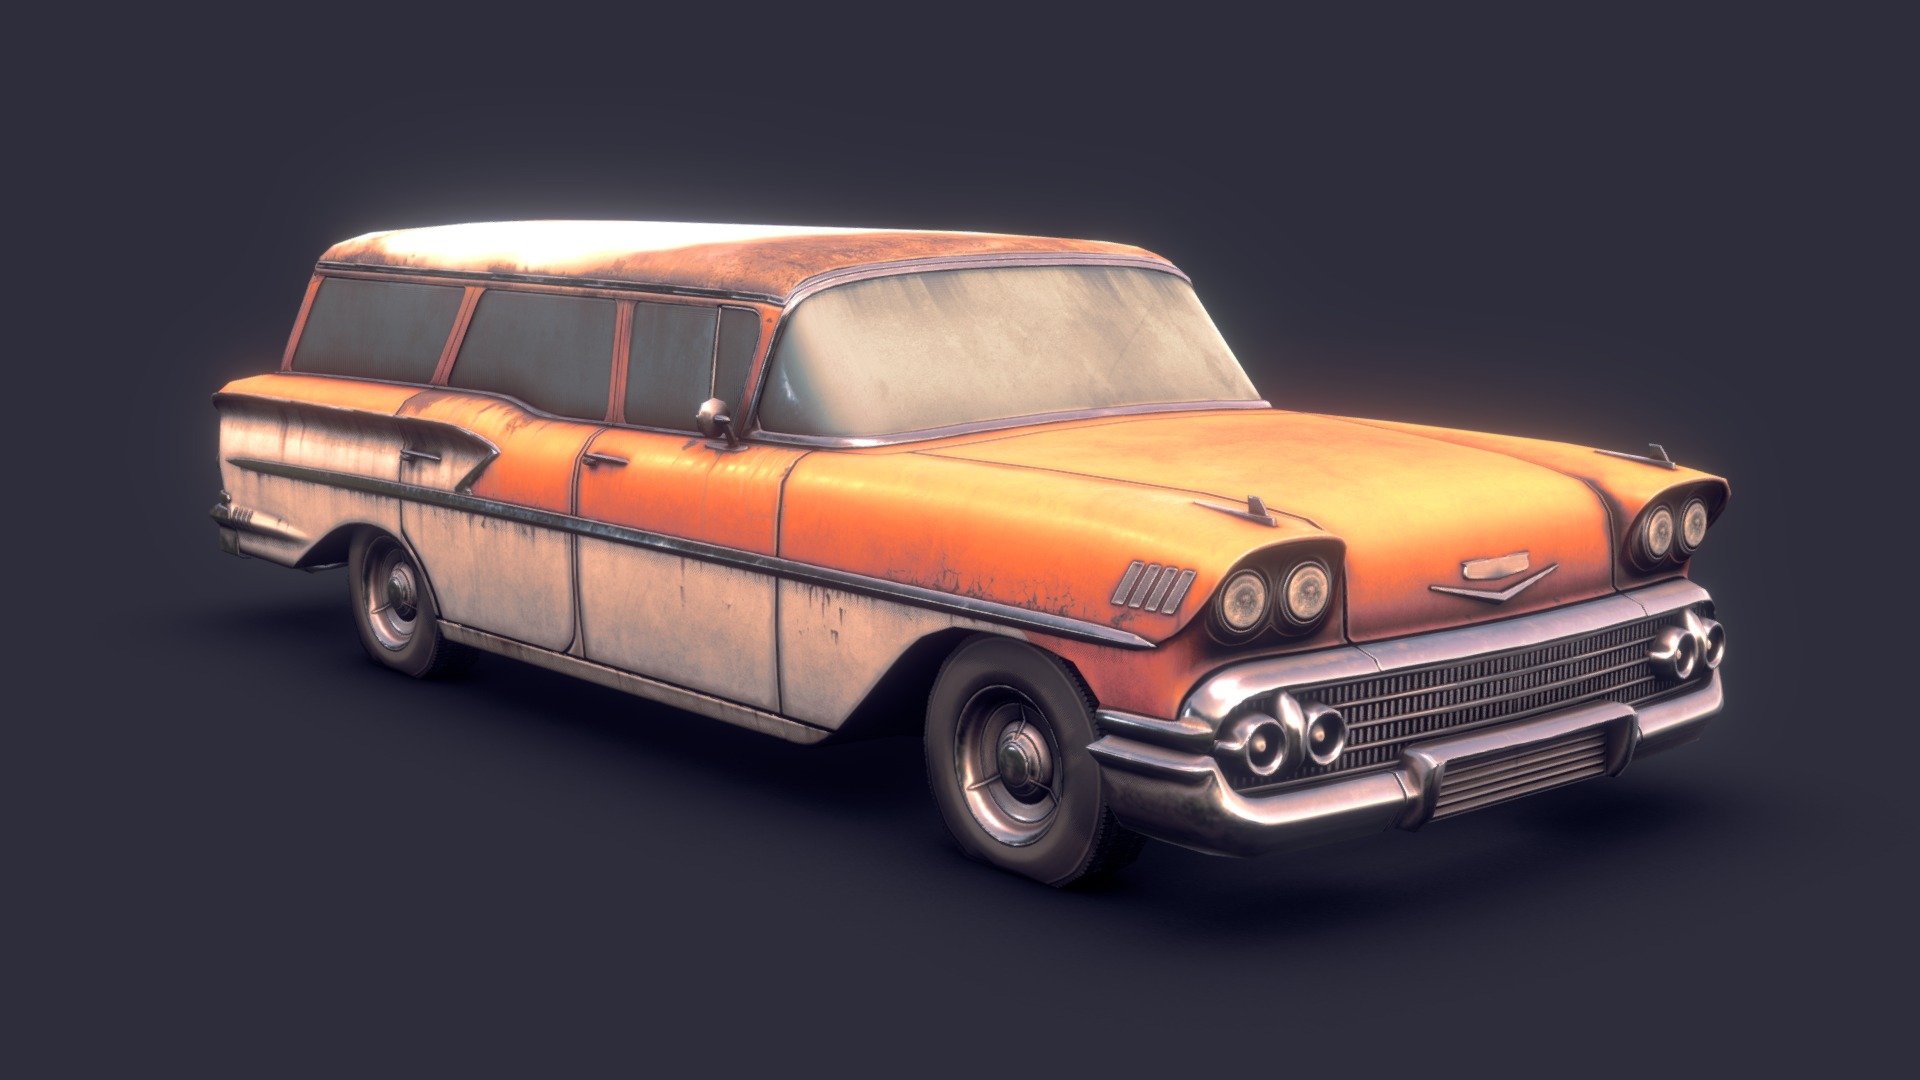 A large station wagon from the late 1950's. Made to try out a different way to do body topology on cars, based on what I've seen &ldquo;more professional